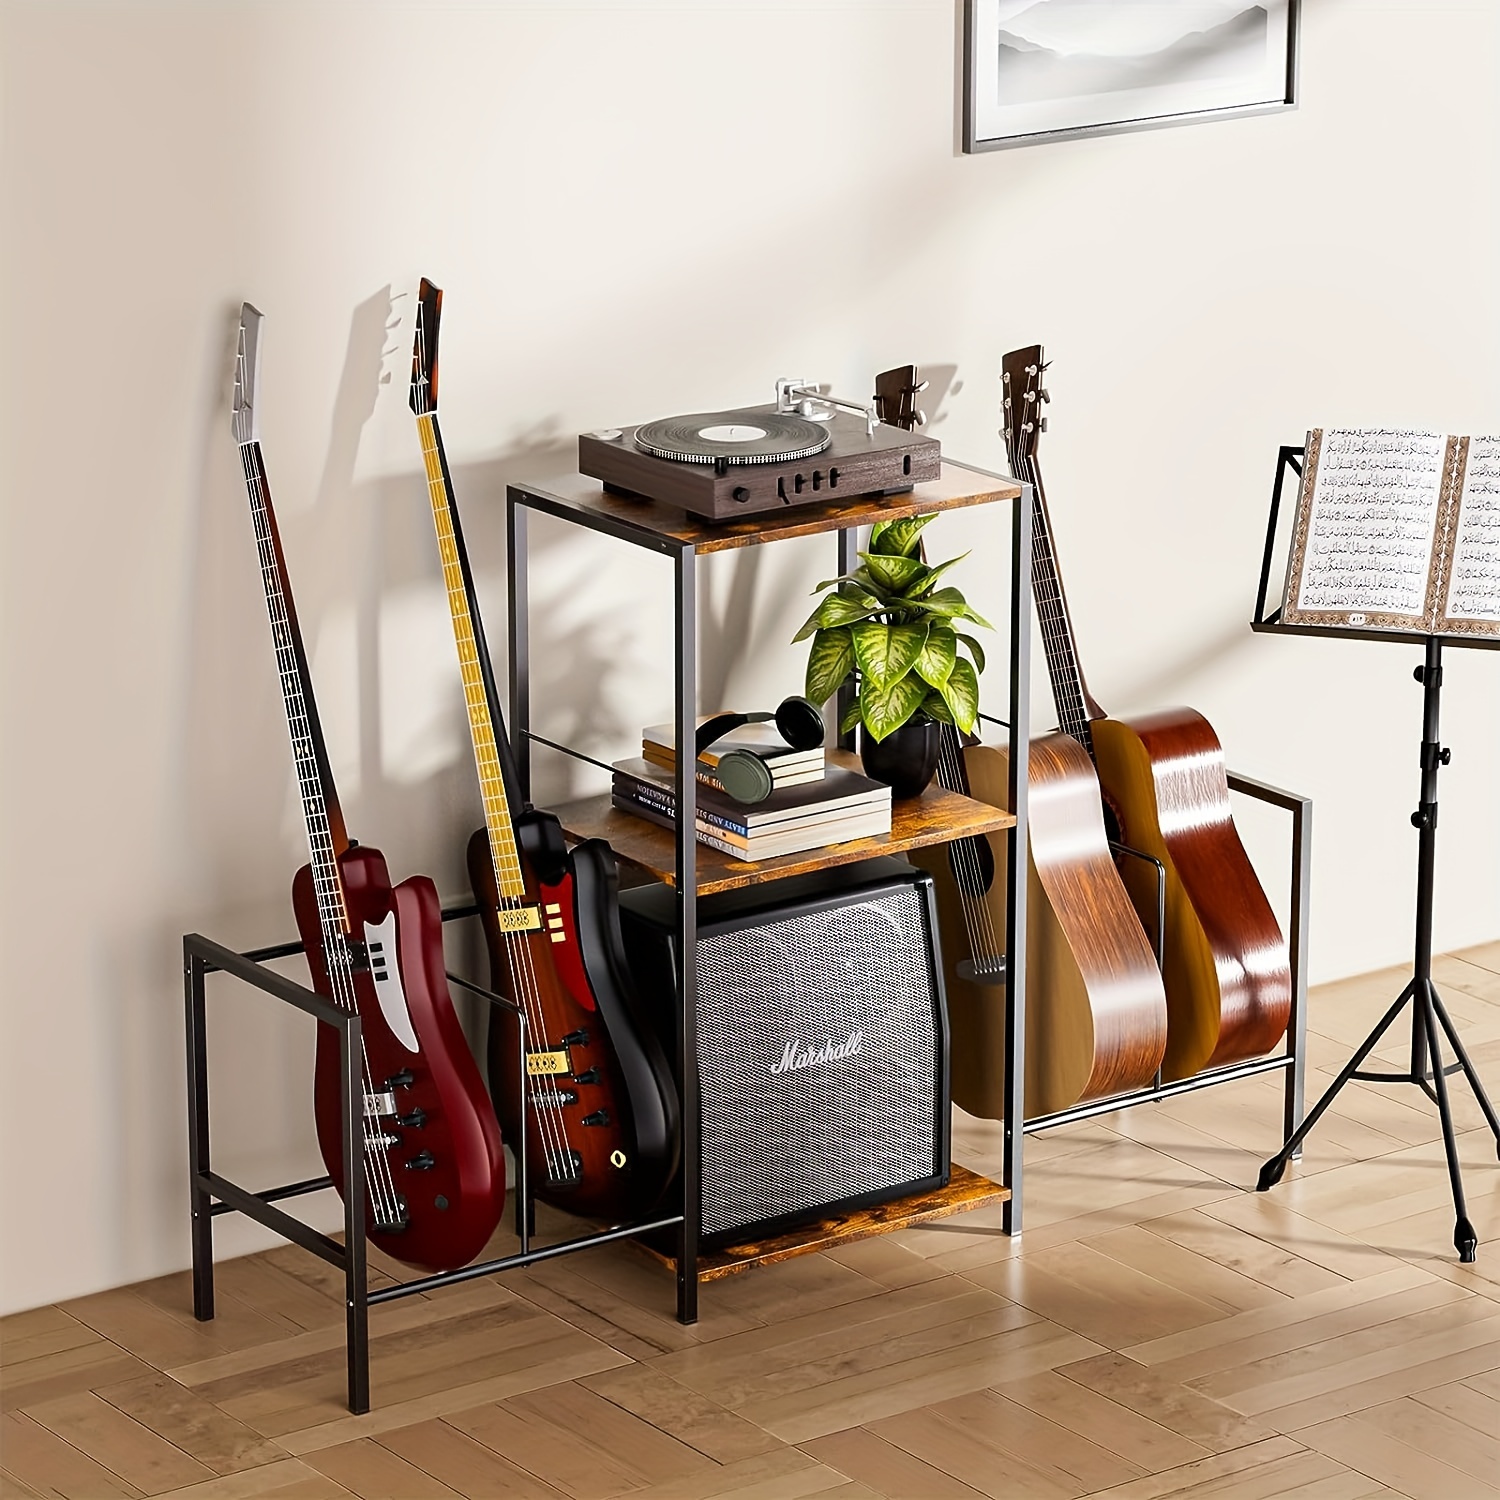 Take a Stand Guitar Stands